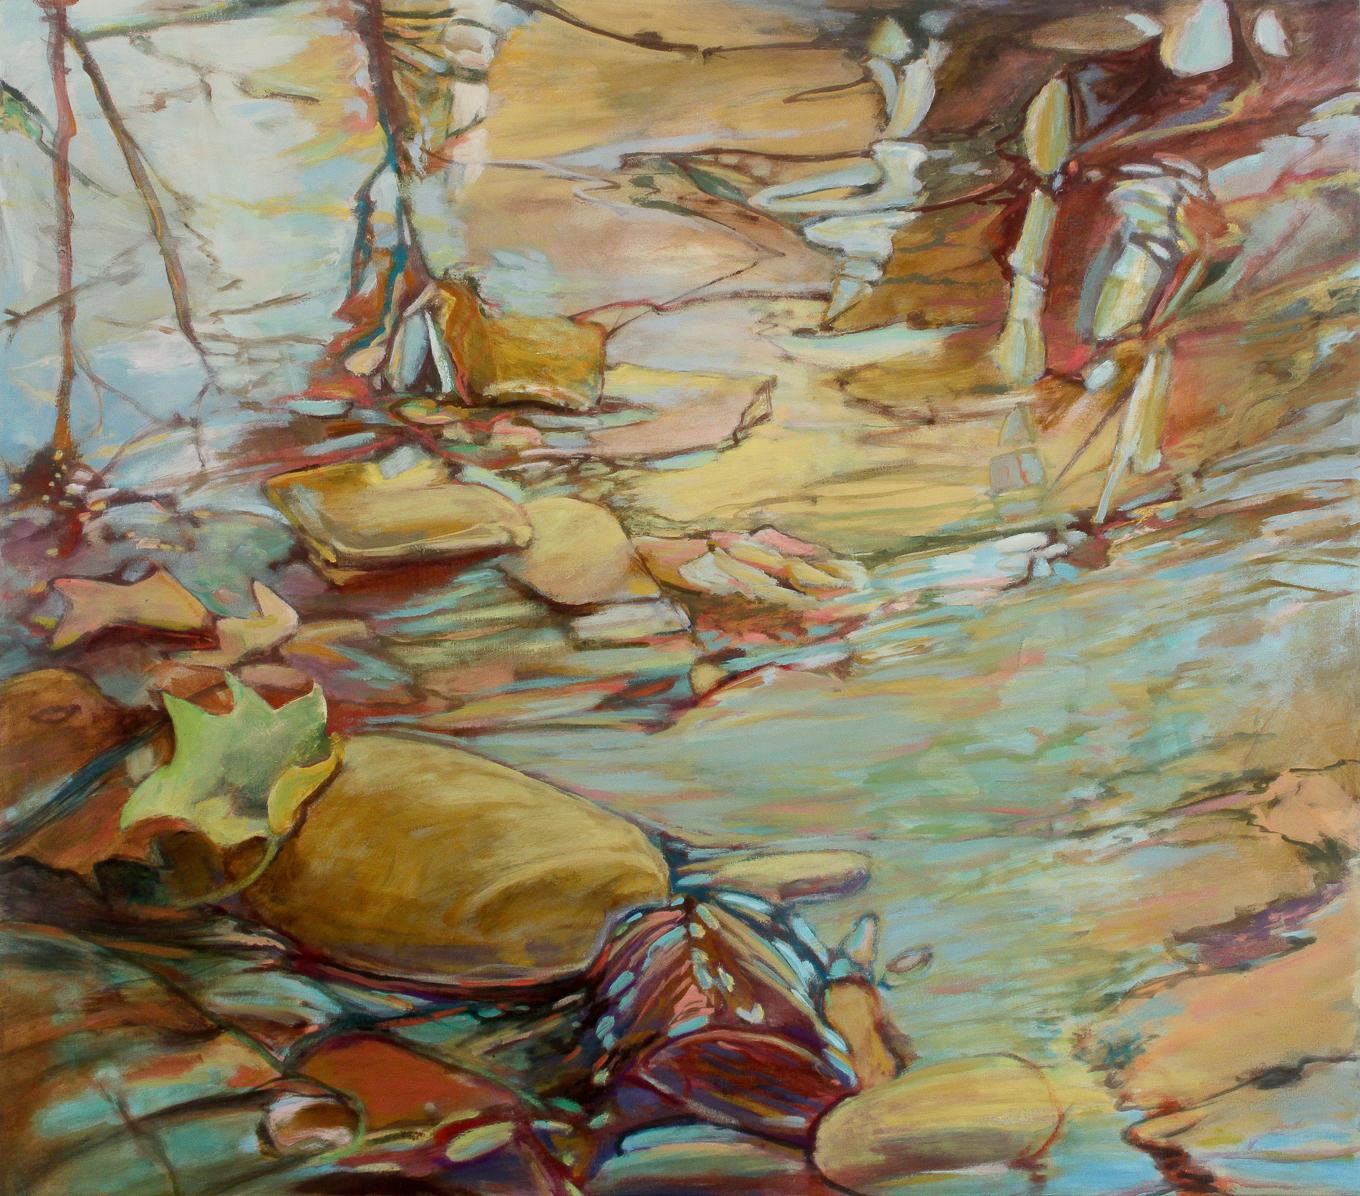 September, Abstract Art, Contemporary Art, Reflection Series of Water &Glass - Brown Landscape Painting by Ellen Hart